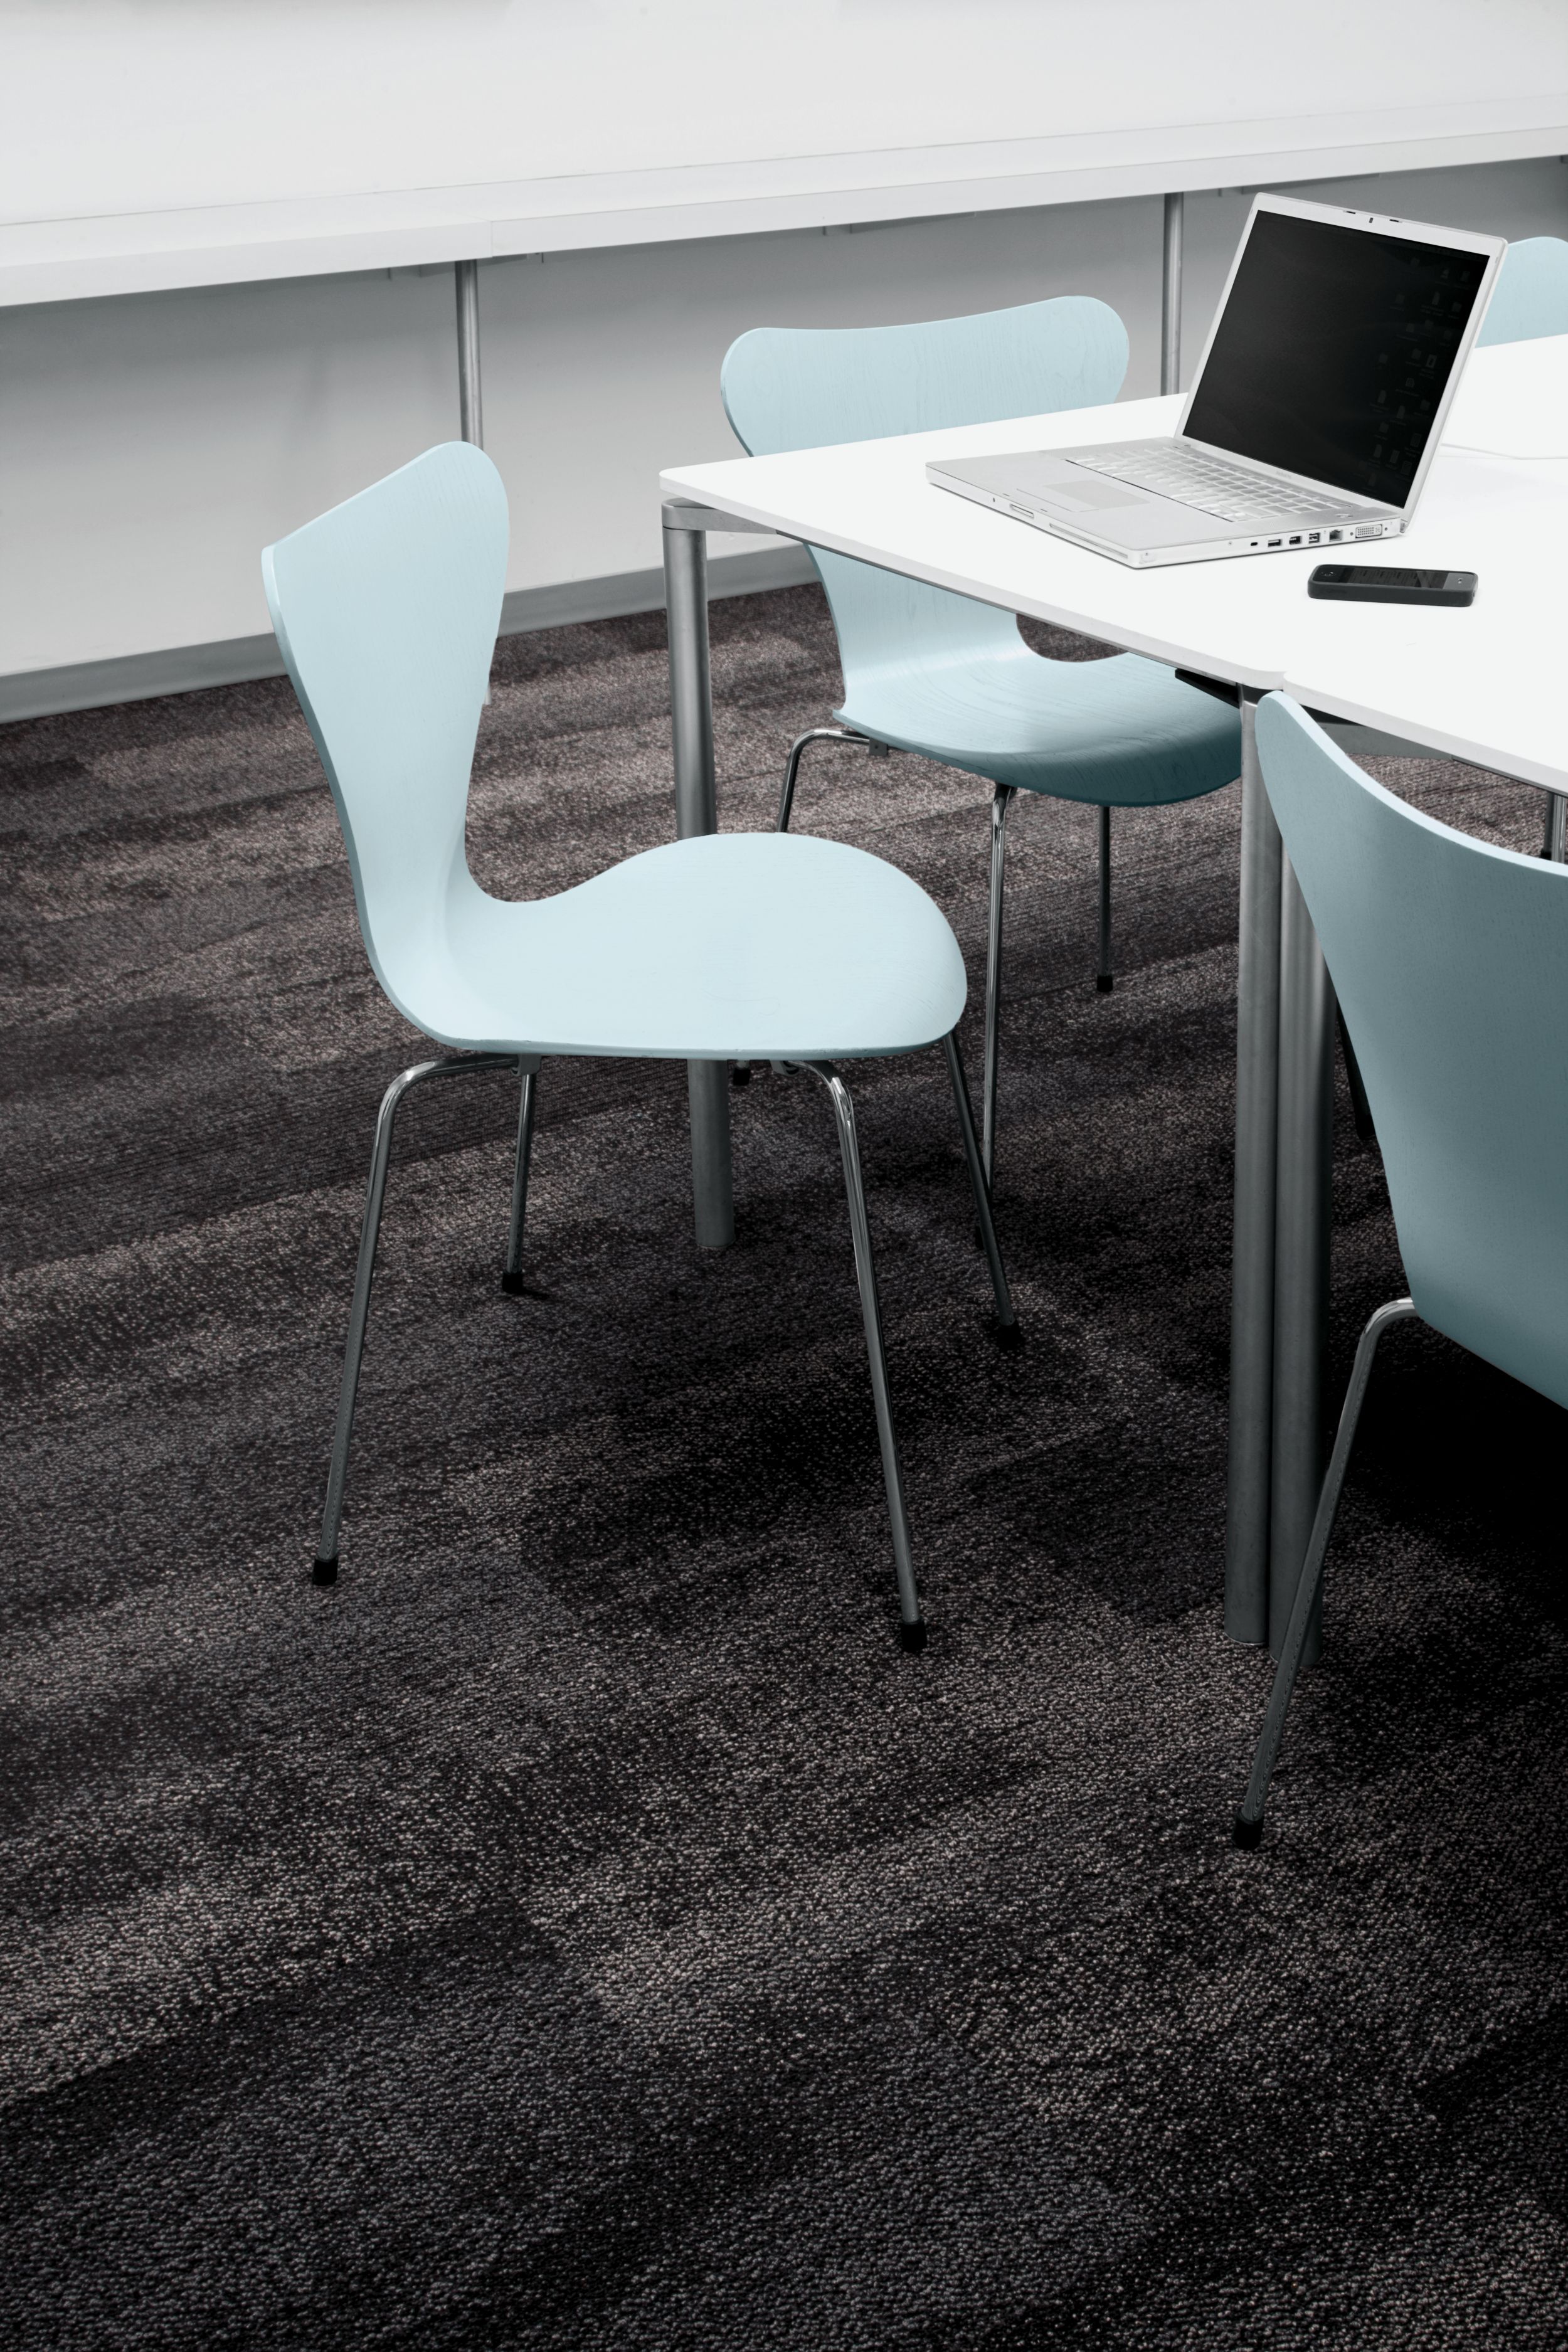 Interface Neighborhood Smooth plank carpet tile in meeting room or classroom with laptop and light blue chairs imagen número 1